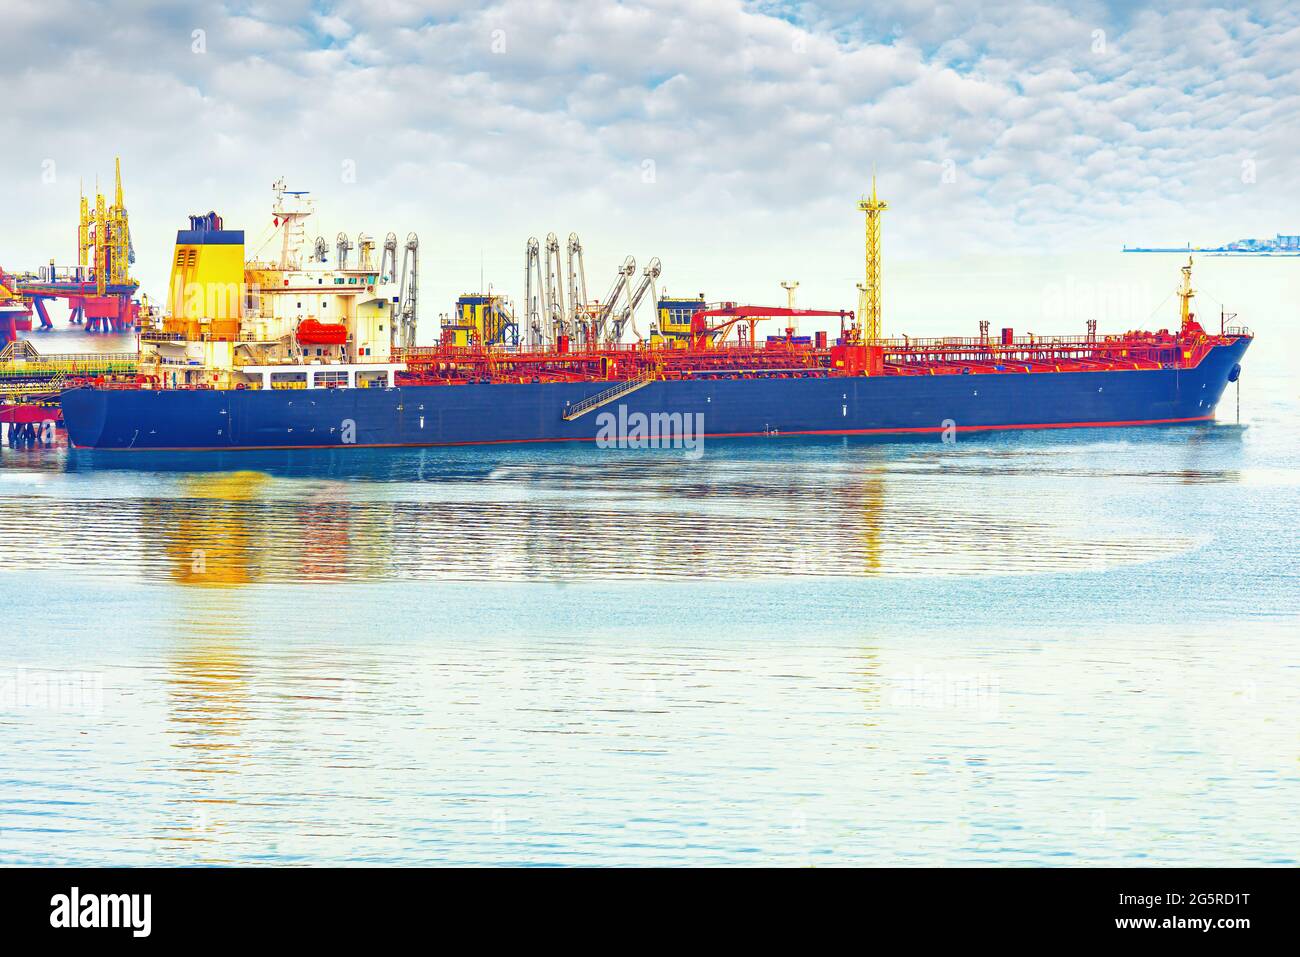 An oil tanker in the Novorossiysk port is loaded with crude oil Stock Photo